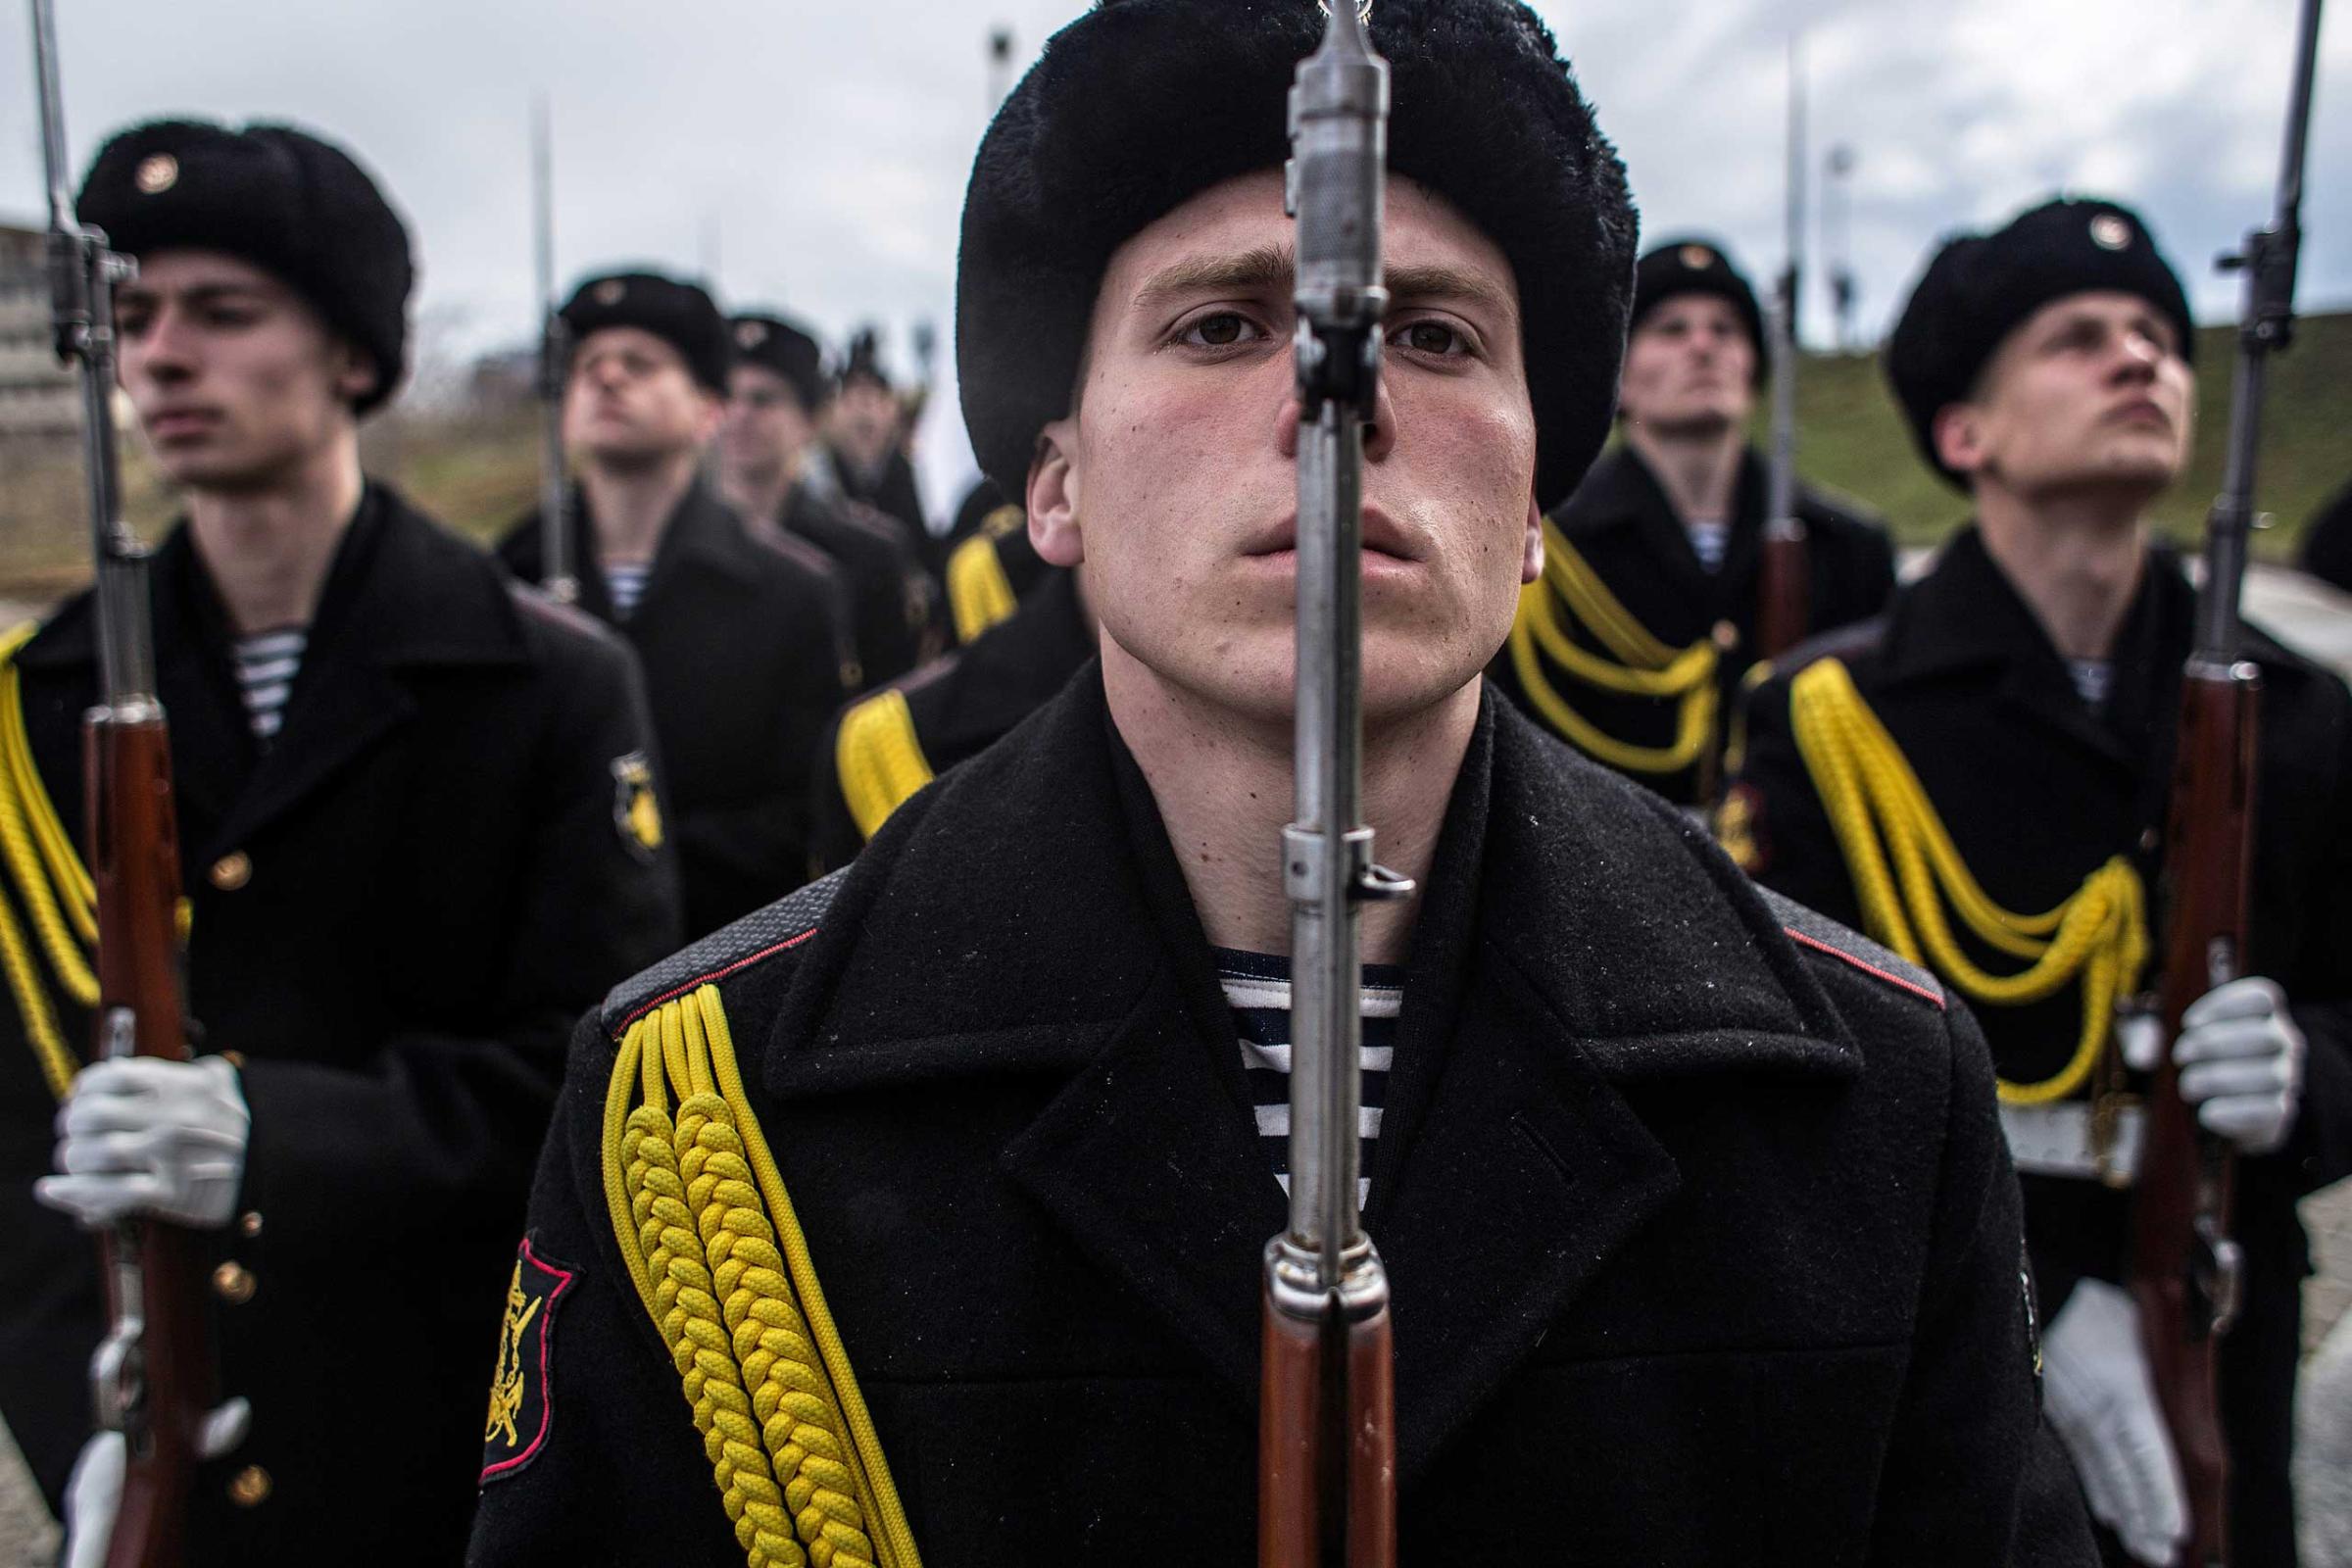 Soldiers of the honor guard prepare to march as people celebrate the first anniversary of the signing of the decree on the annexation of the Crimea by the Russian Federation, on March 18, 2014 in Sevastopol, Crimea.